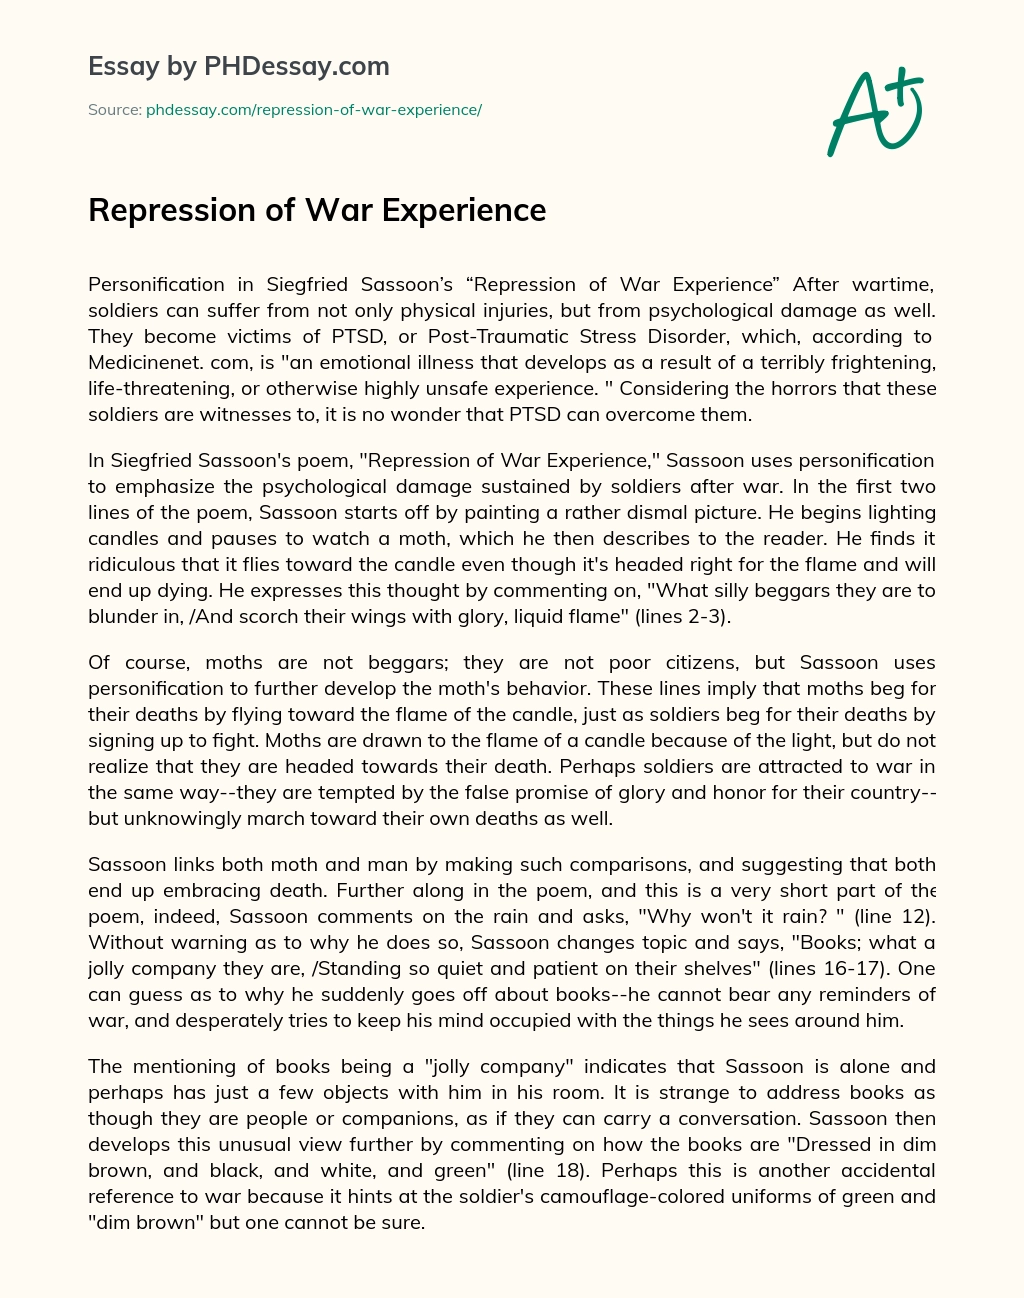 Repression of War Experience essay